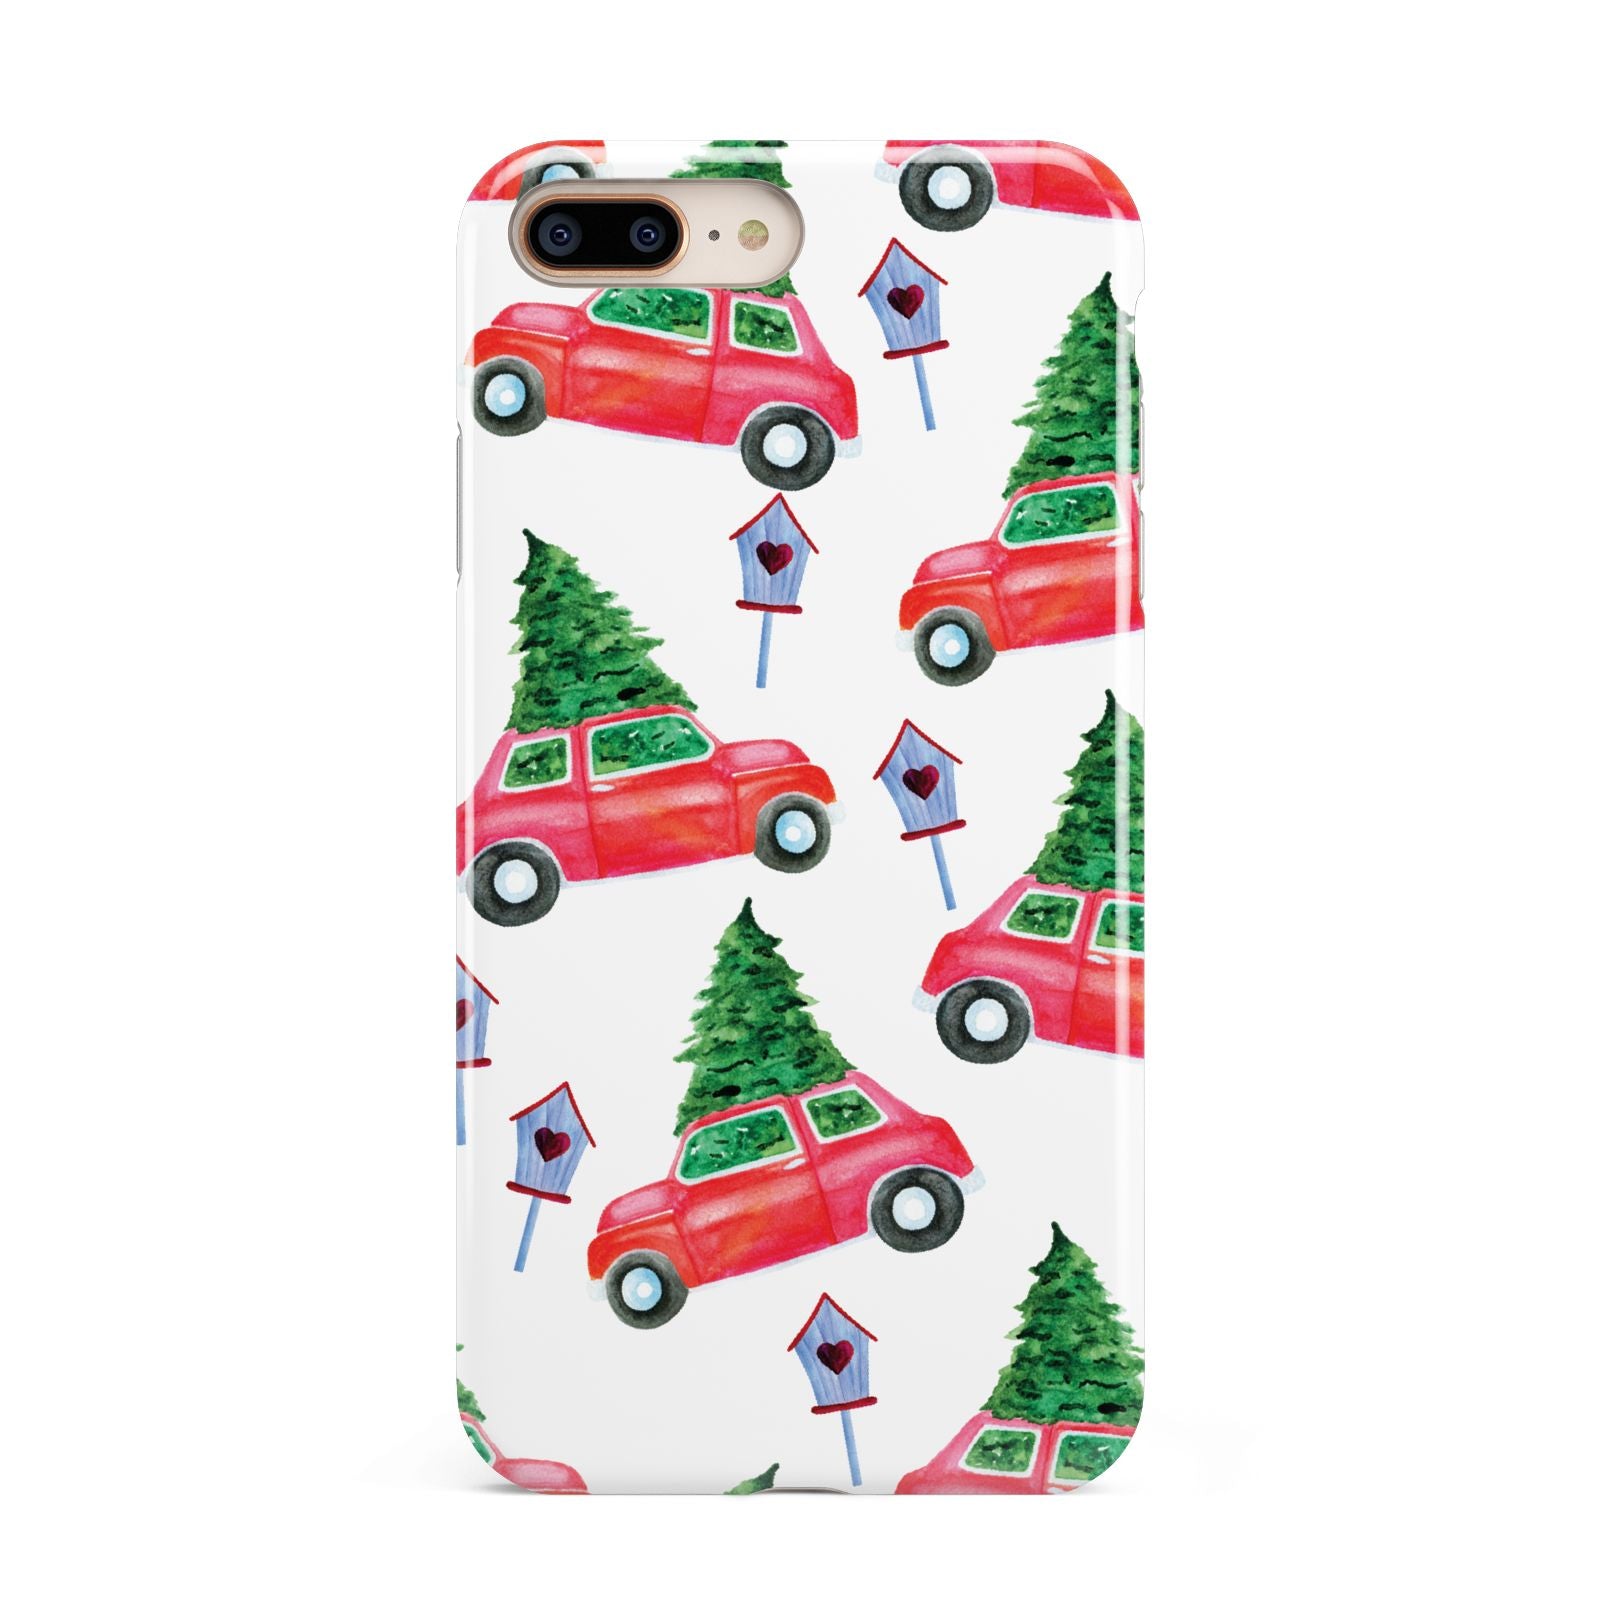 Driving home for Christmas Apple iPhone 7 8 Plus 3D Tough Case